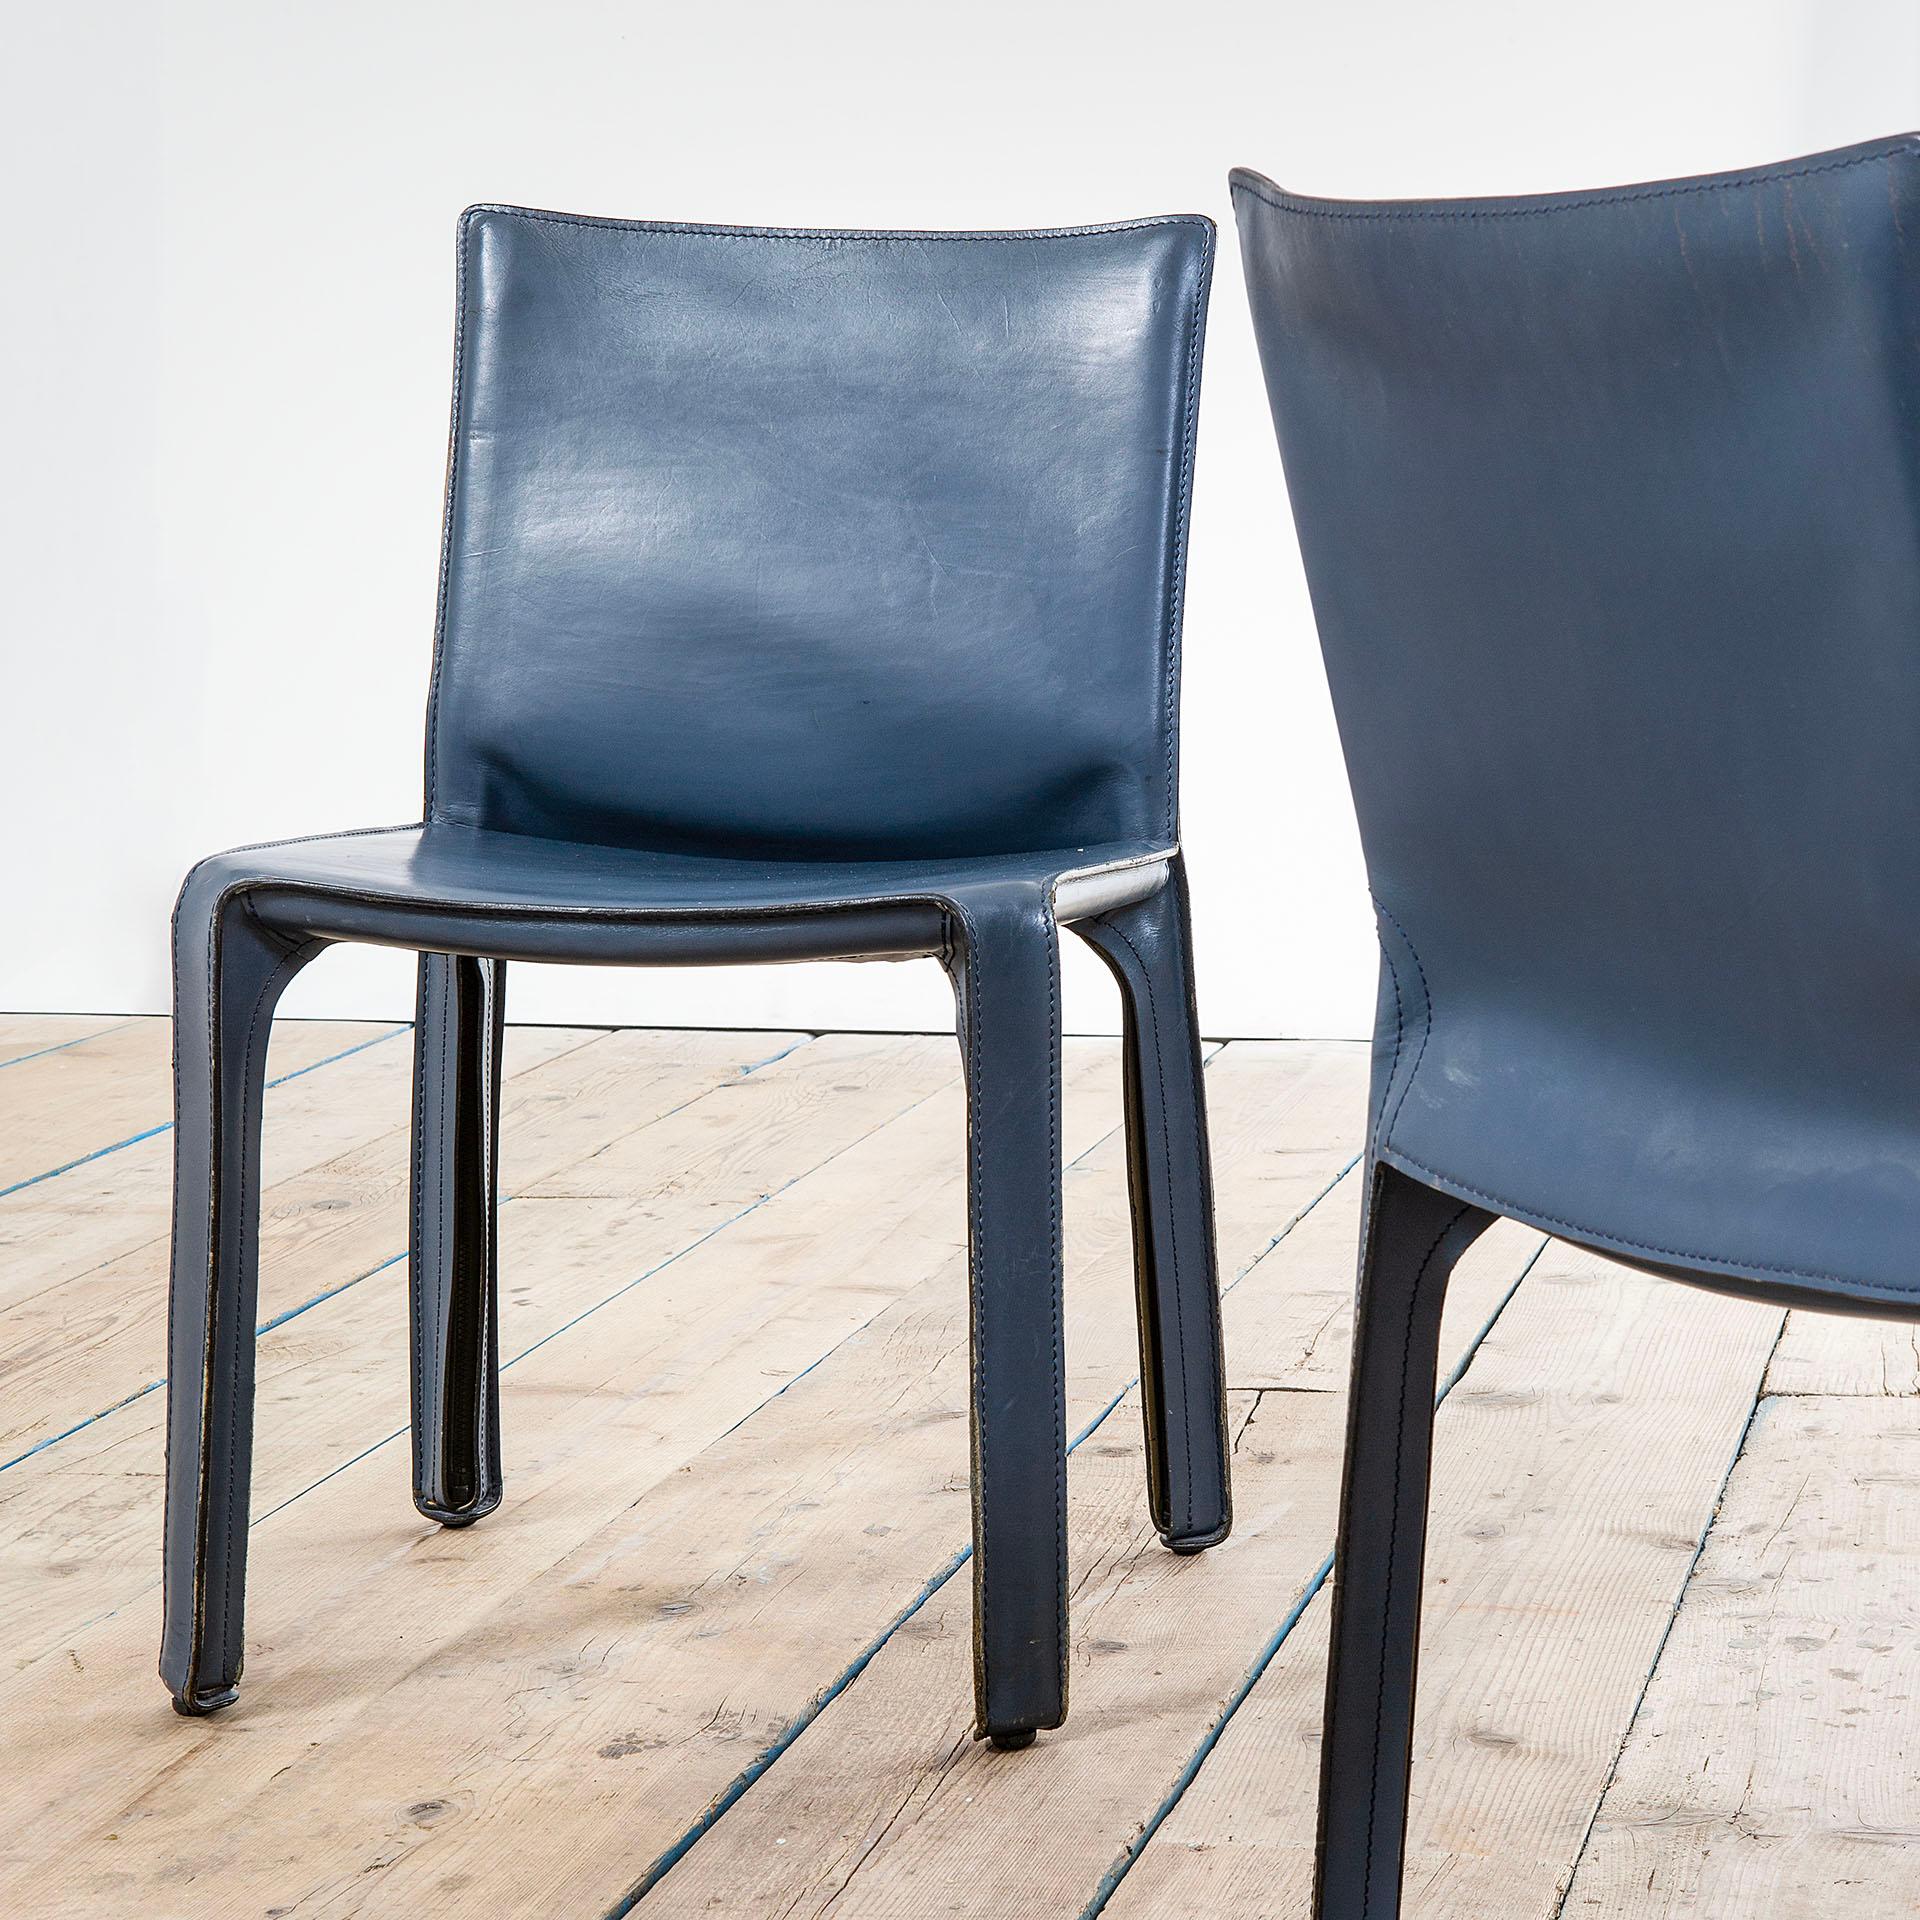 Italian 20th Century Mario Bellini Set of 4 Chairs mod. Cab in Blue for Cassina, 70s For Sale